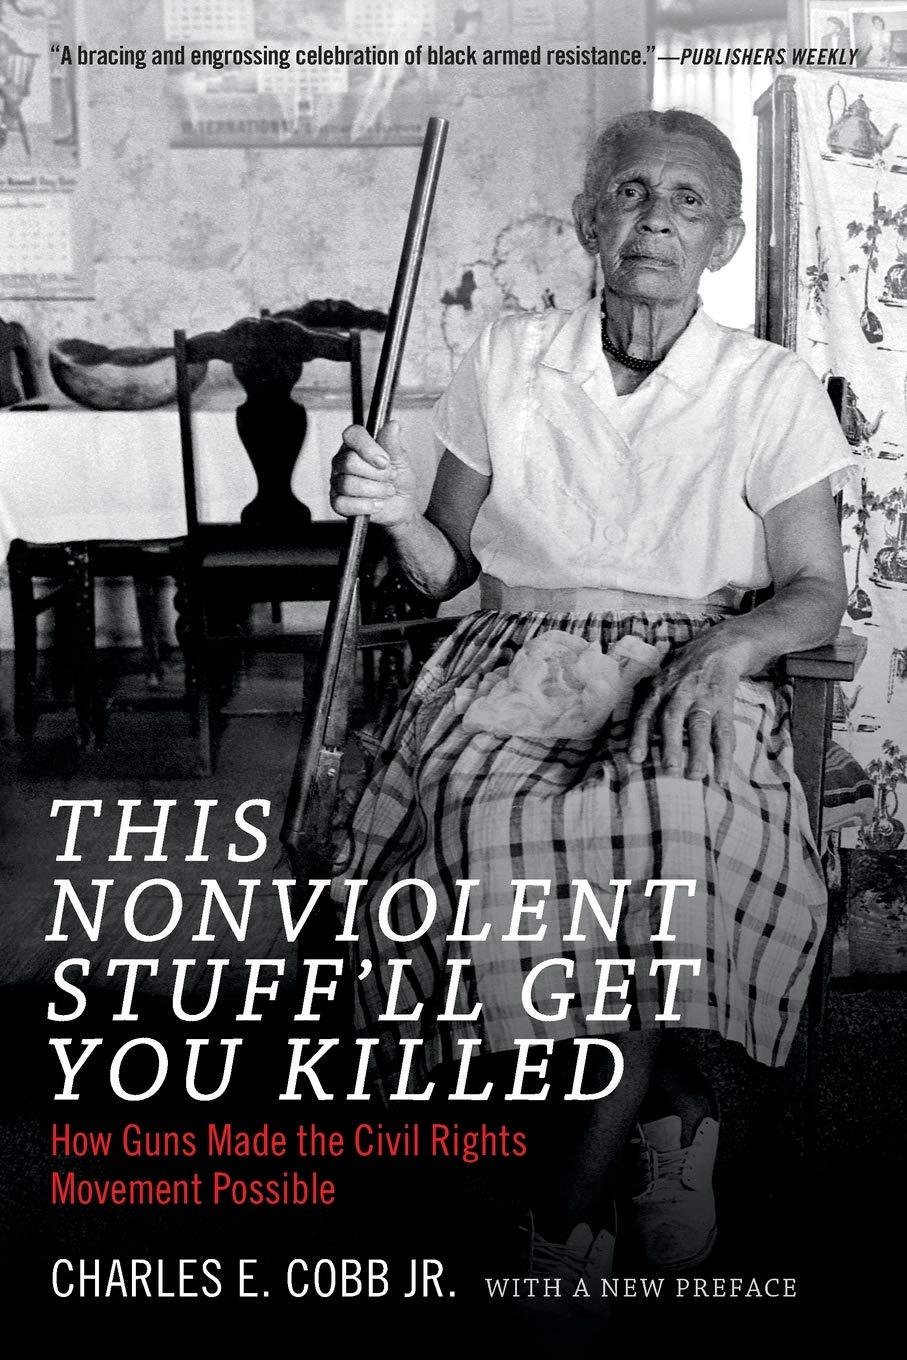 This Nonviolent Stuff'll Get You Killed // How Guns Made the Civil Rights Movement Possible